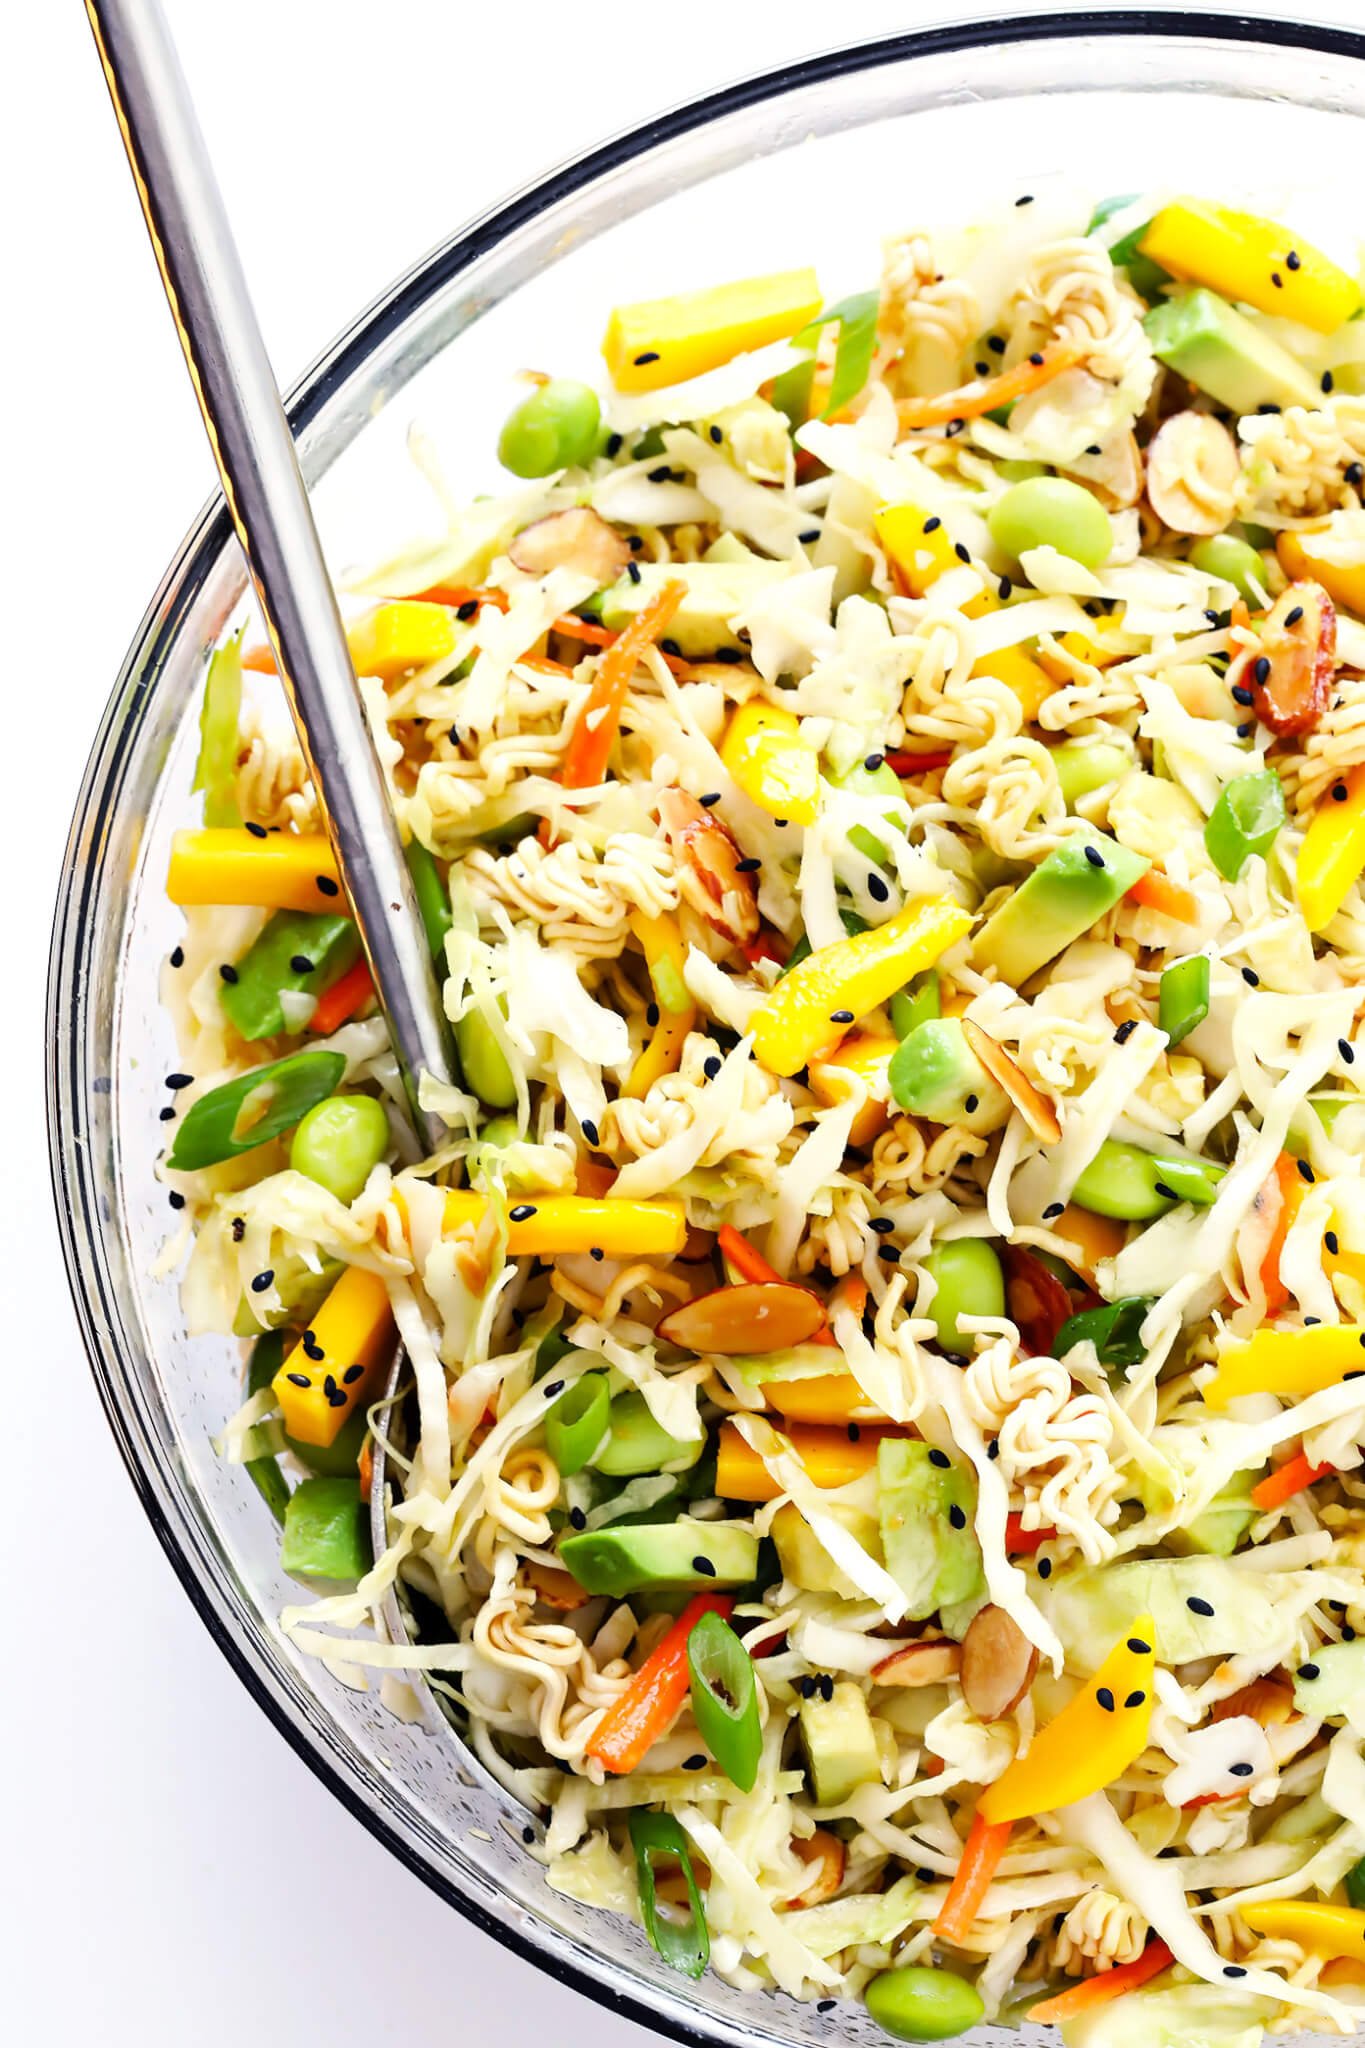 This Crunchy Asian Ramen Noodle Salad is easy to make, tossed with fresh mango, avocado, edamame, cole slaw, almonds, and a sesame honey vinaigrette...and SO delicious! Perfect for potlucks, picnics, or as a simple salad or side dish. | gimmesomeoven.com